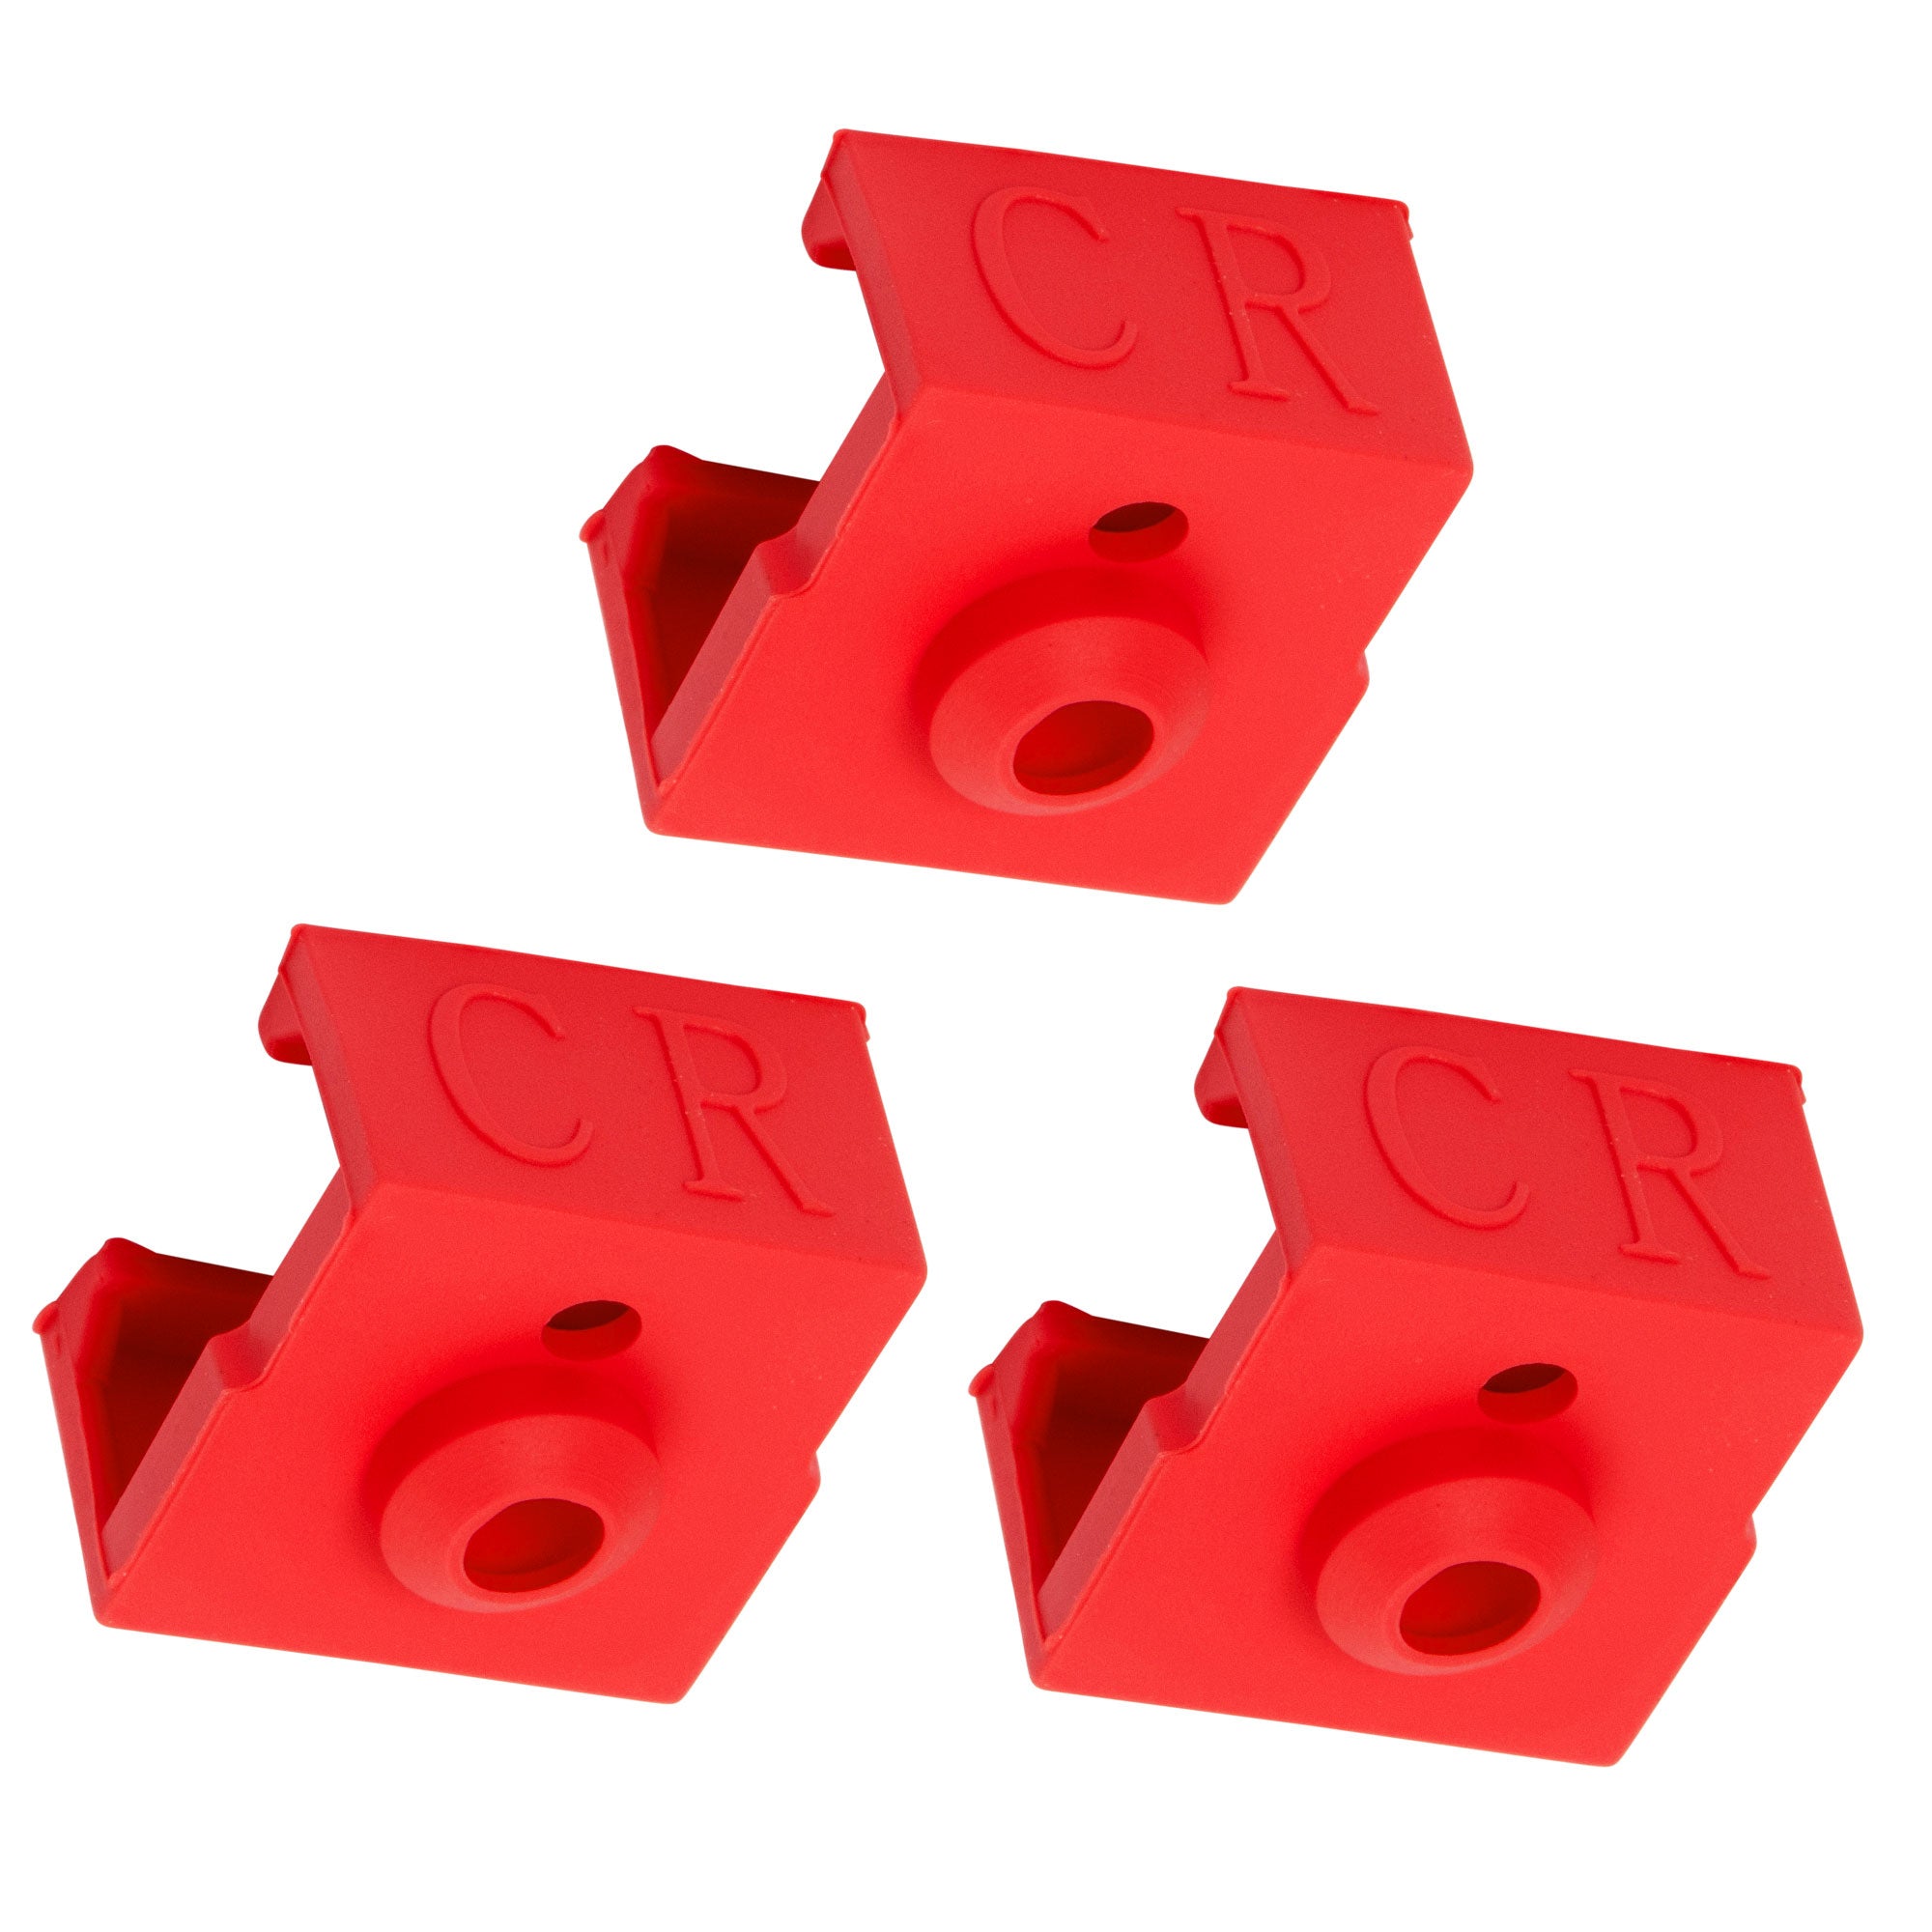 3 Pcs Heater Block Silicone Cover for Creality CR-6 SE/Max/Ender 3 Max Neo 3D Printer